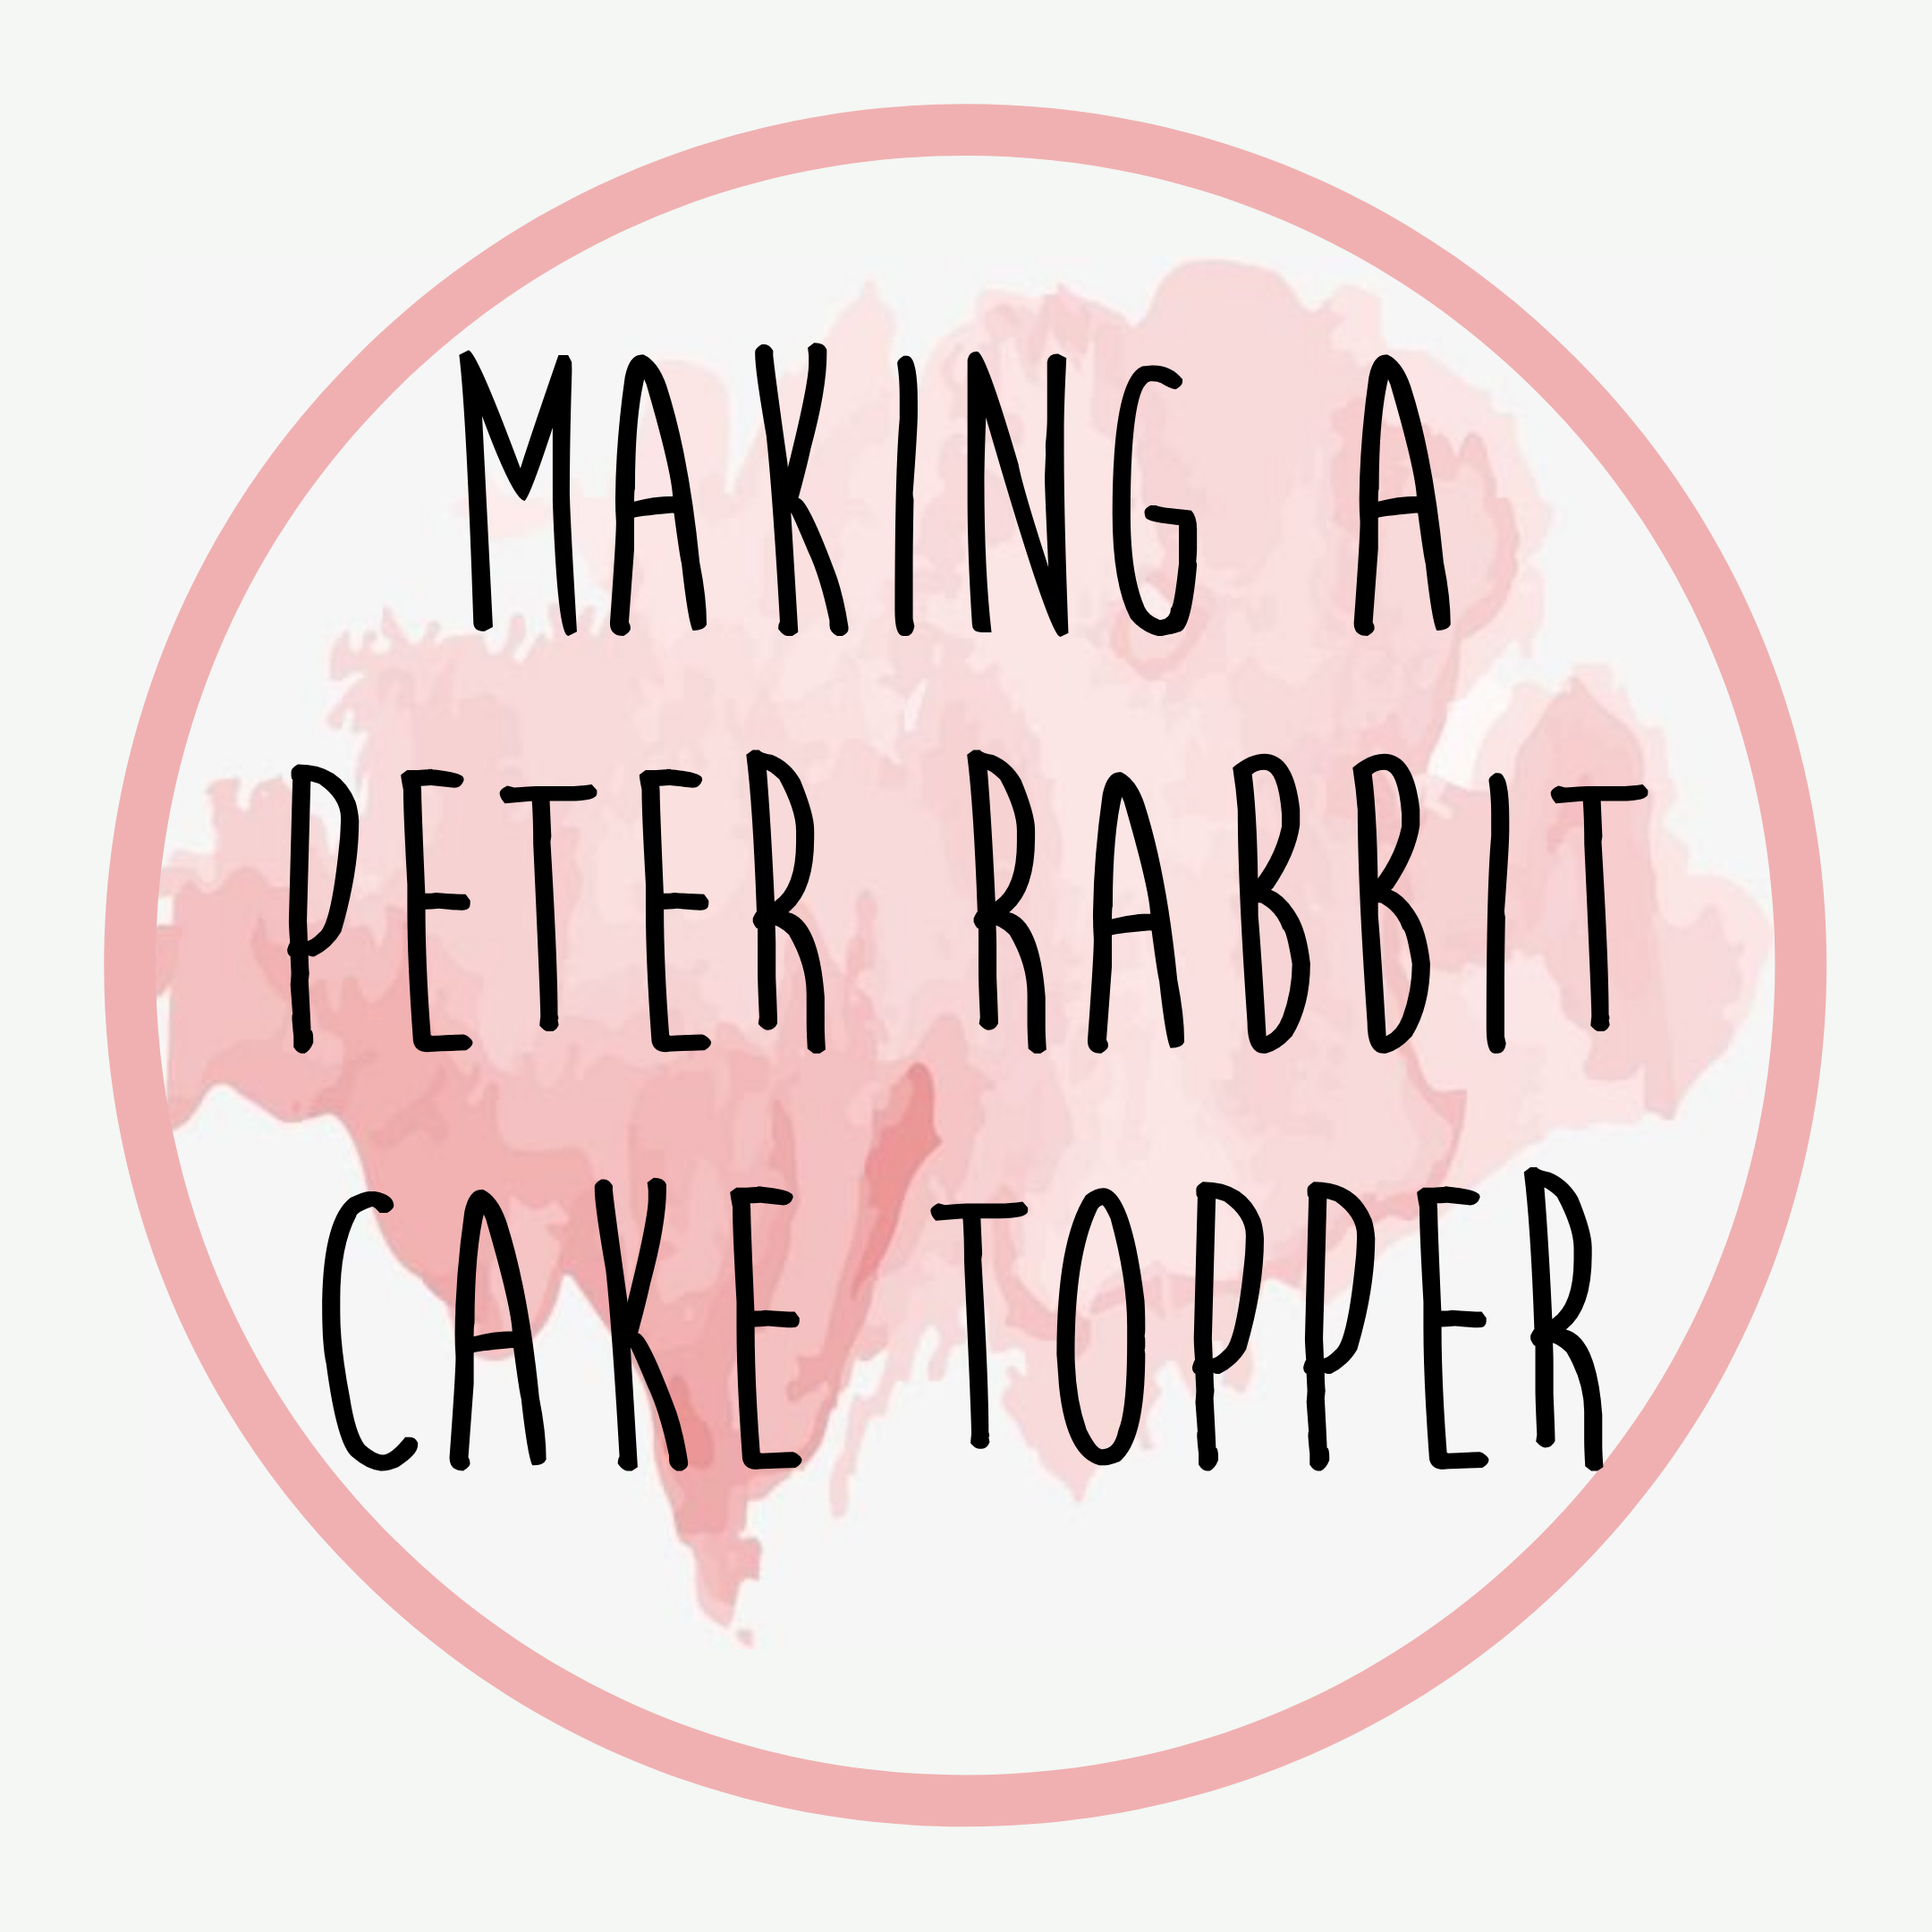 How to make a Peter Rabbit cake topper